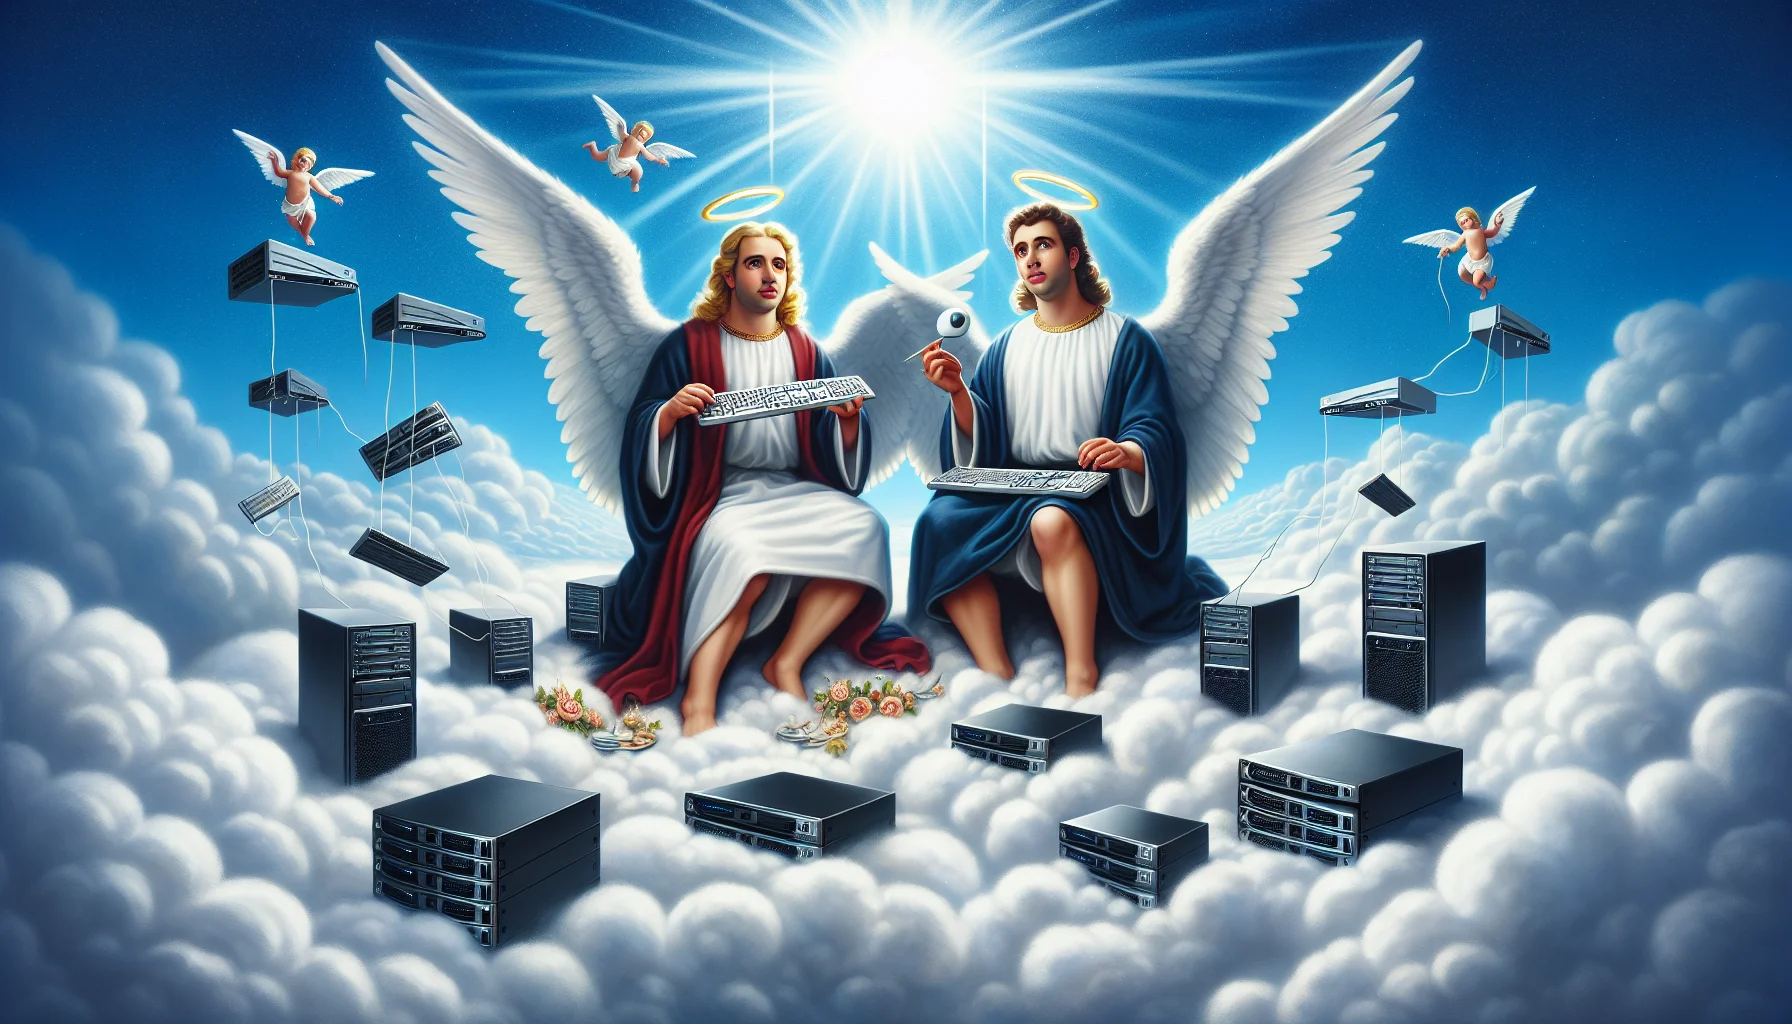 An amusing scene depicting two angels, who happen to be proficient in the art of web hosting. They are of Latin descent, slinging the heavenly equivalent of modern technology around their ethereal frames. The duo is perched on puffy white clouds, amidst a crystal-clear blue sky. In their hands, they wield keyboards and mice, symbolic extensions of their expertise. Around them, divine rays of light emanate, highlighting floating devices essential for web hosting, like servers and routers. The dramatic yet whimsical setting is in line with light-hearted divine mischief.